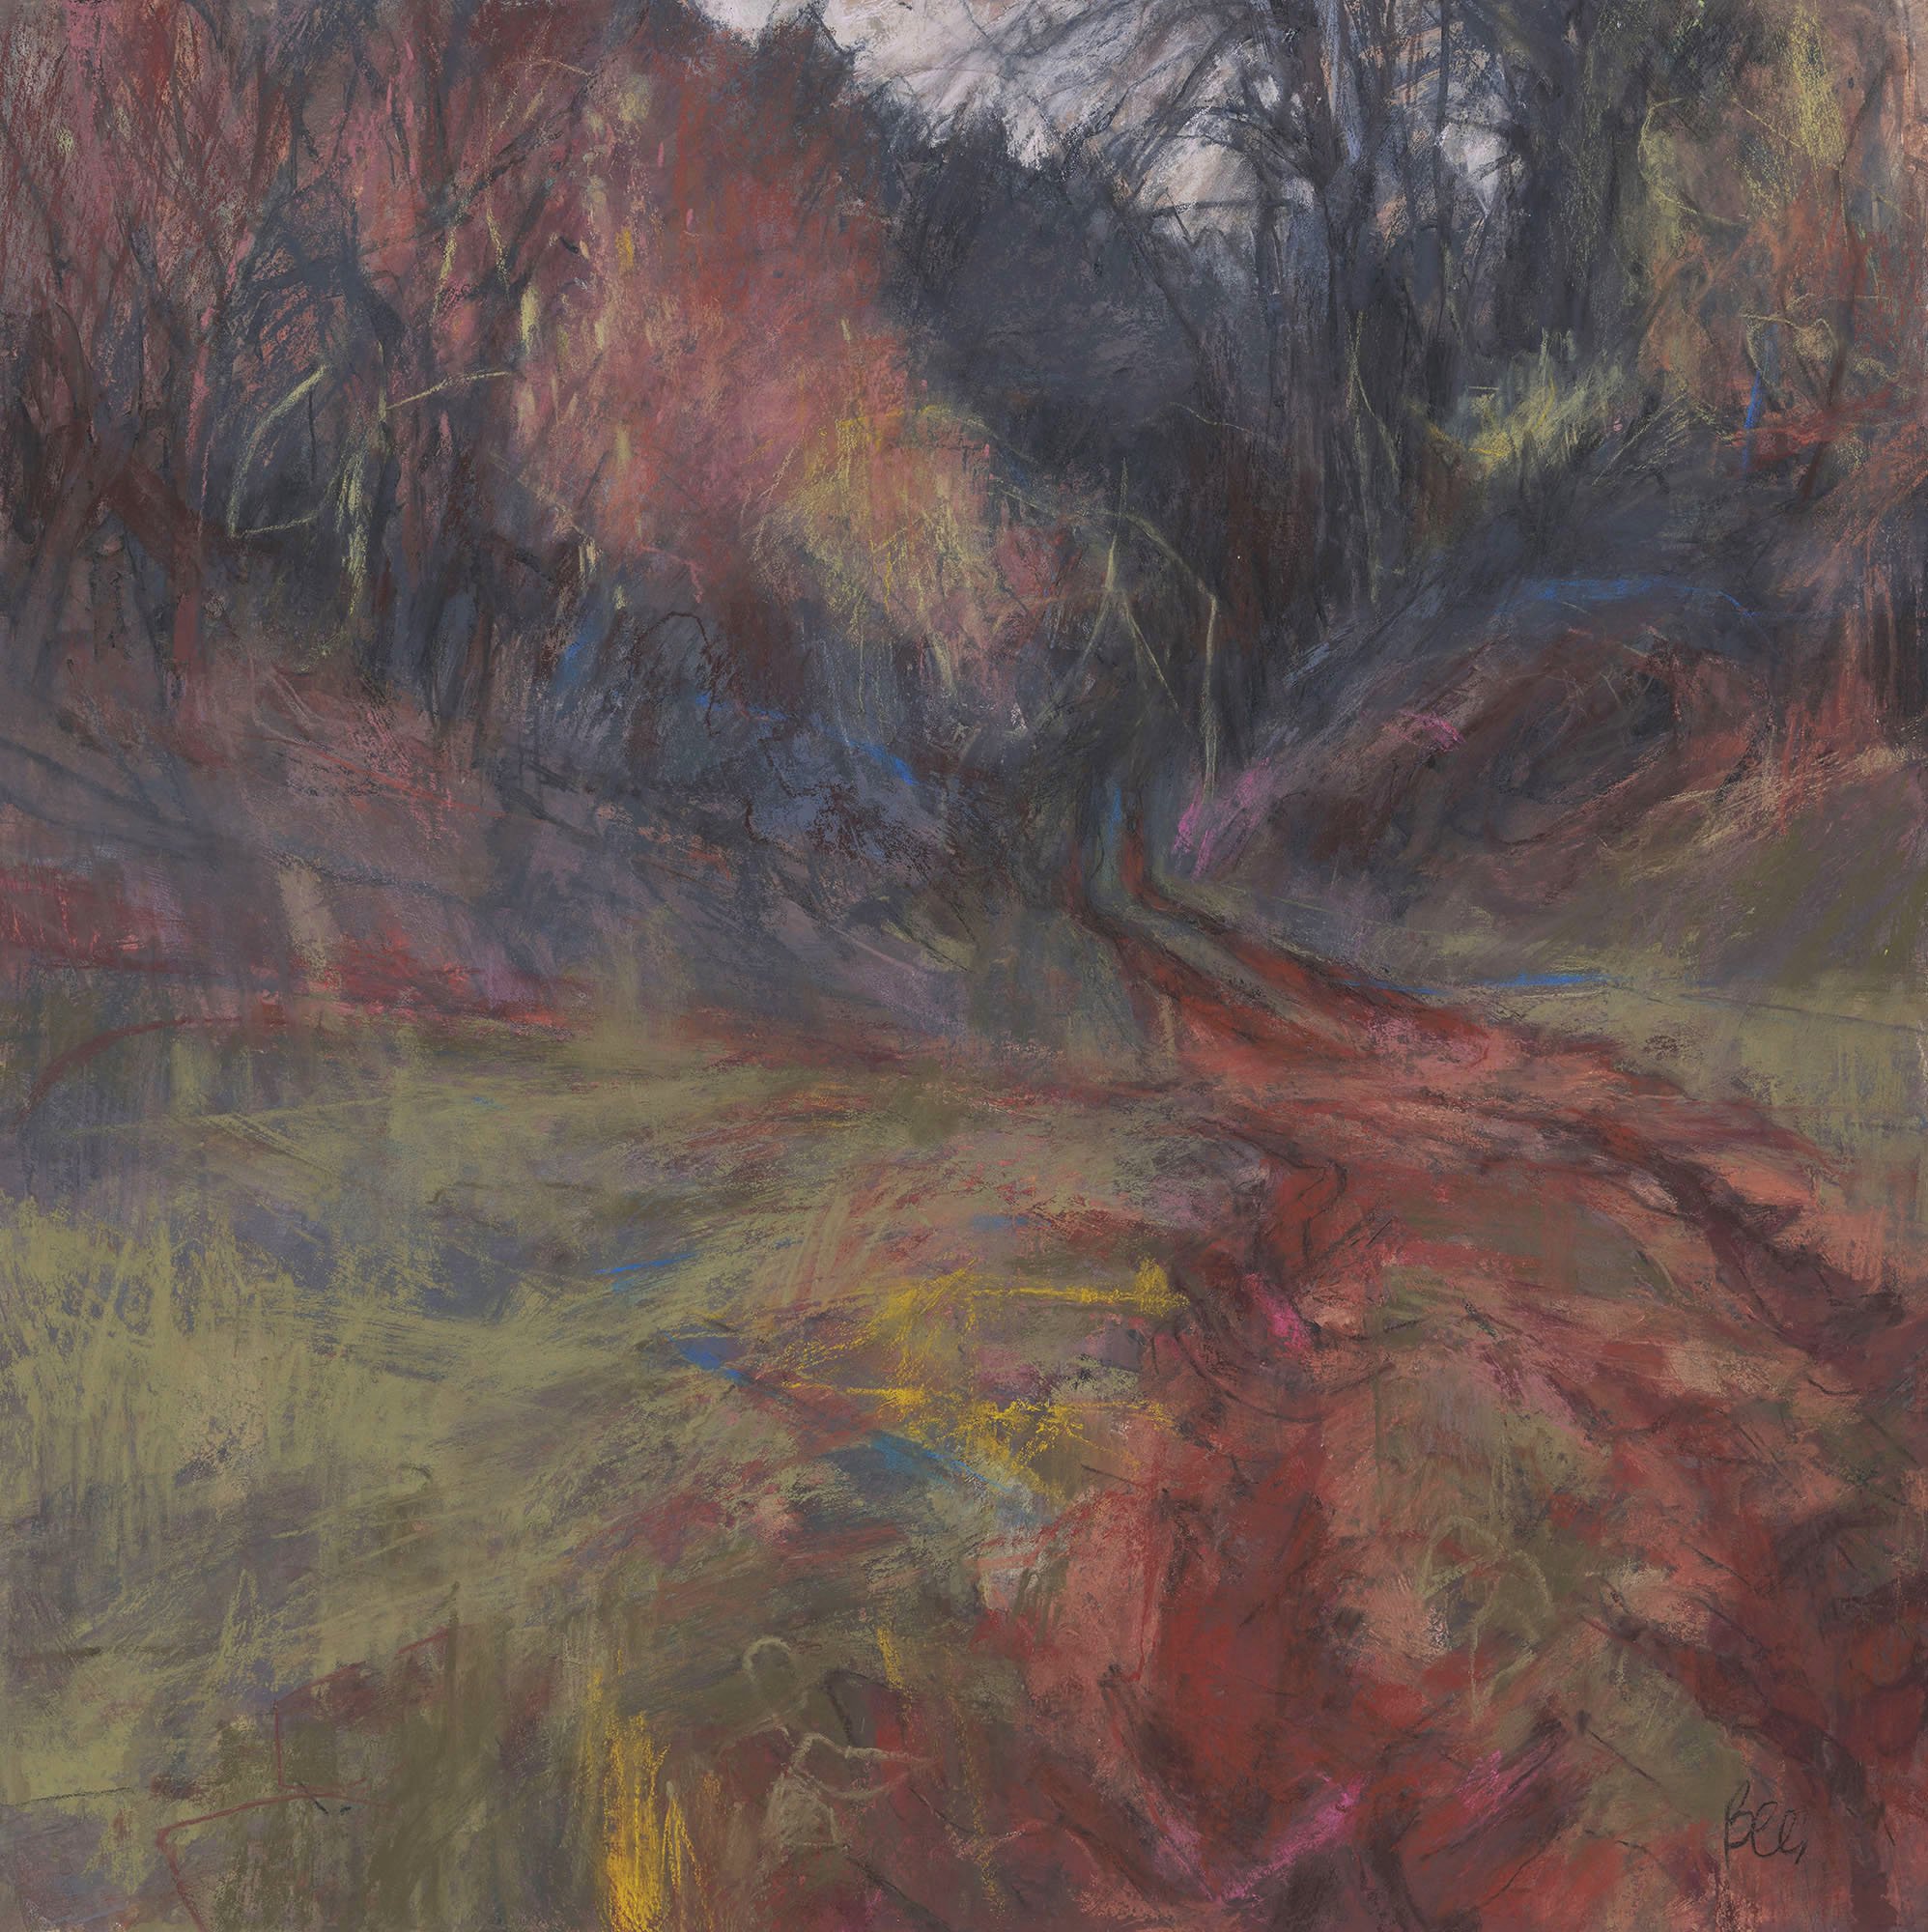 S Bee PS Late Afternoon, Catkins and Red Mud pastel with acrylic 59x59cms lowres brjpg.jpg